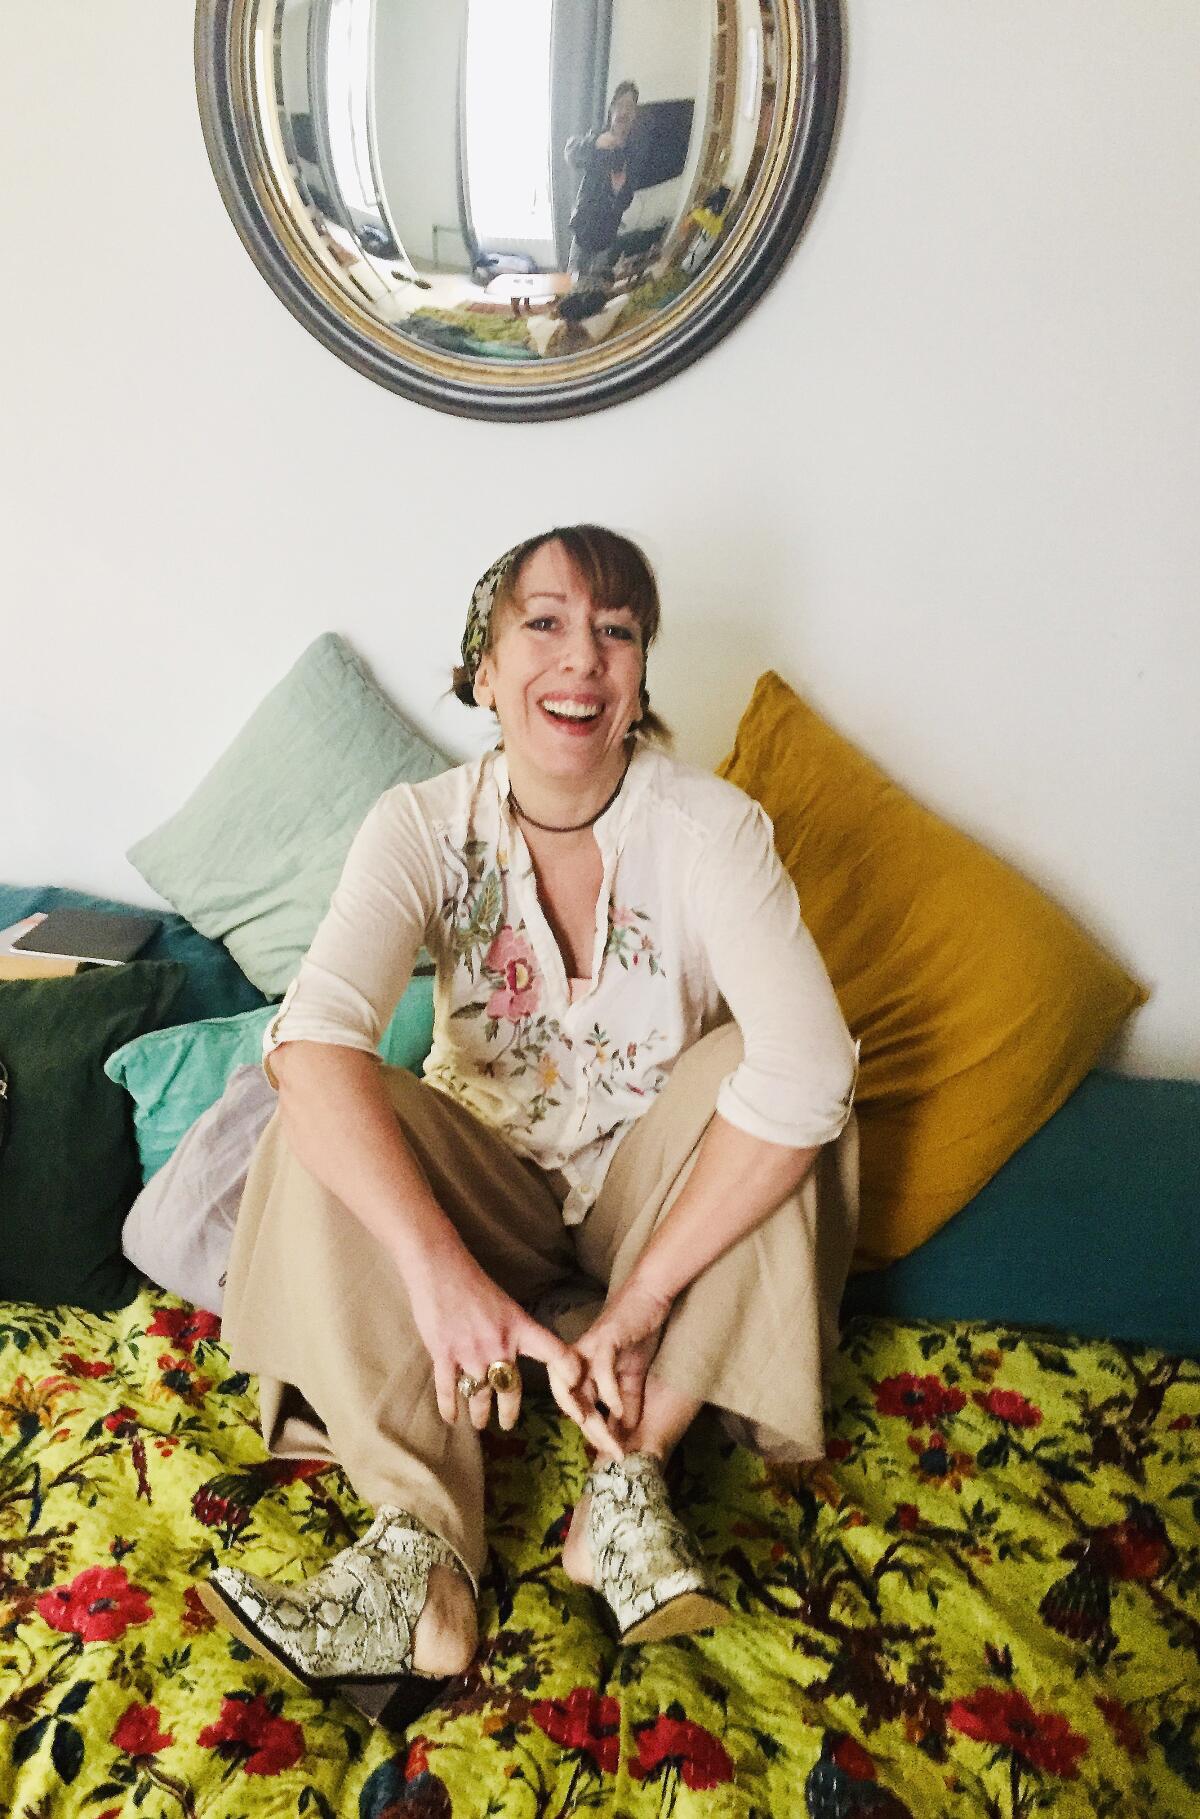 "Blow Your House Down" memoirist Gina Frangello sits on a bed